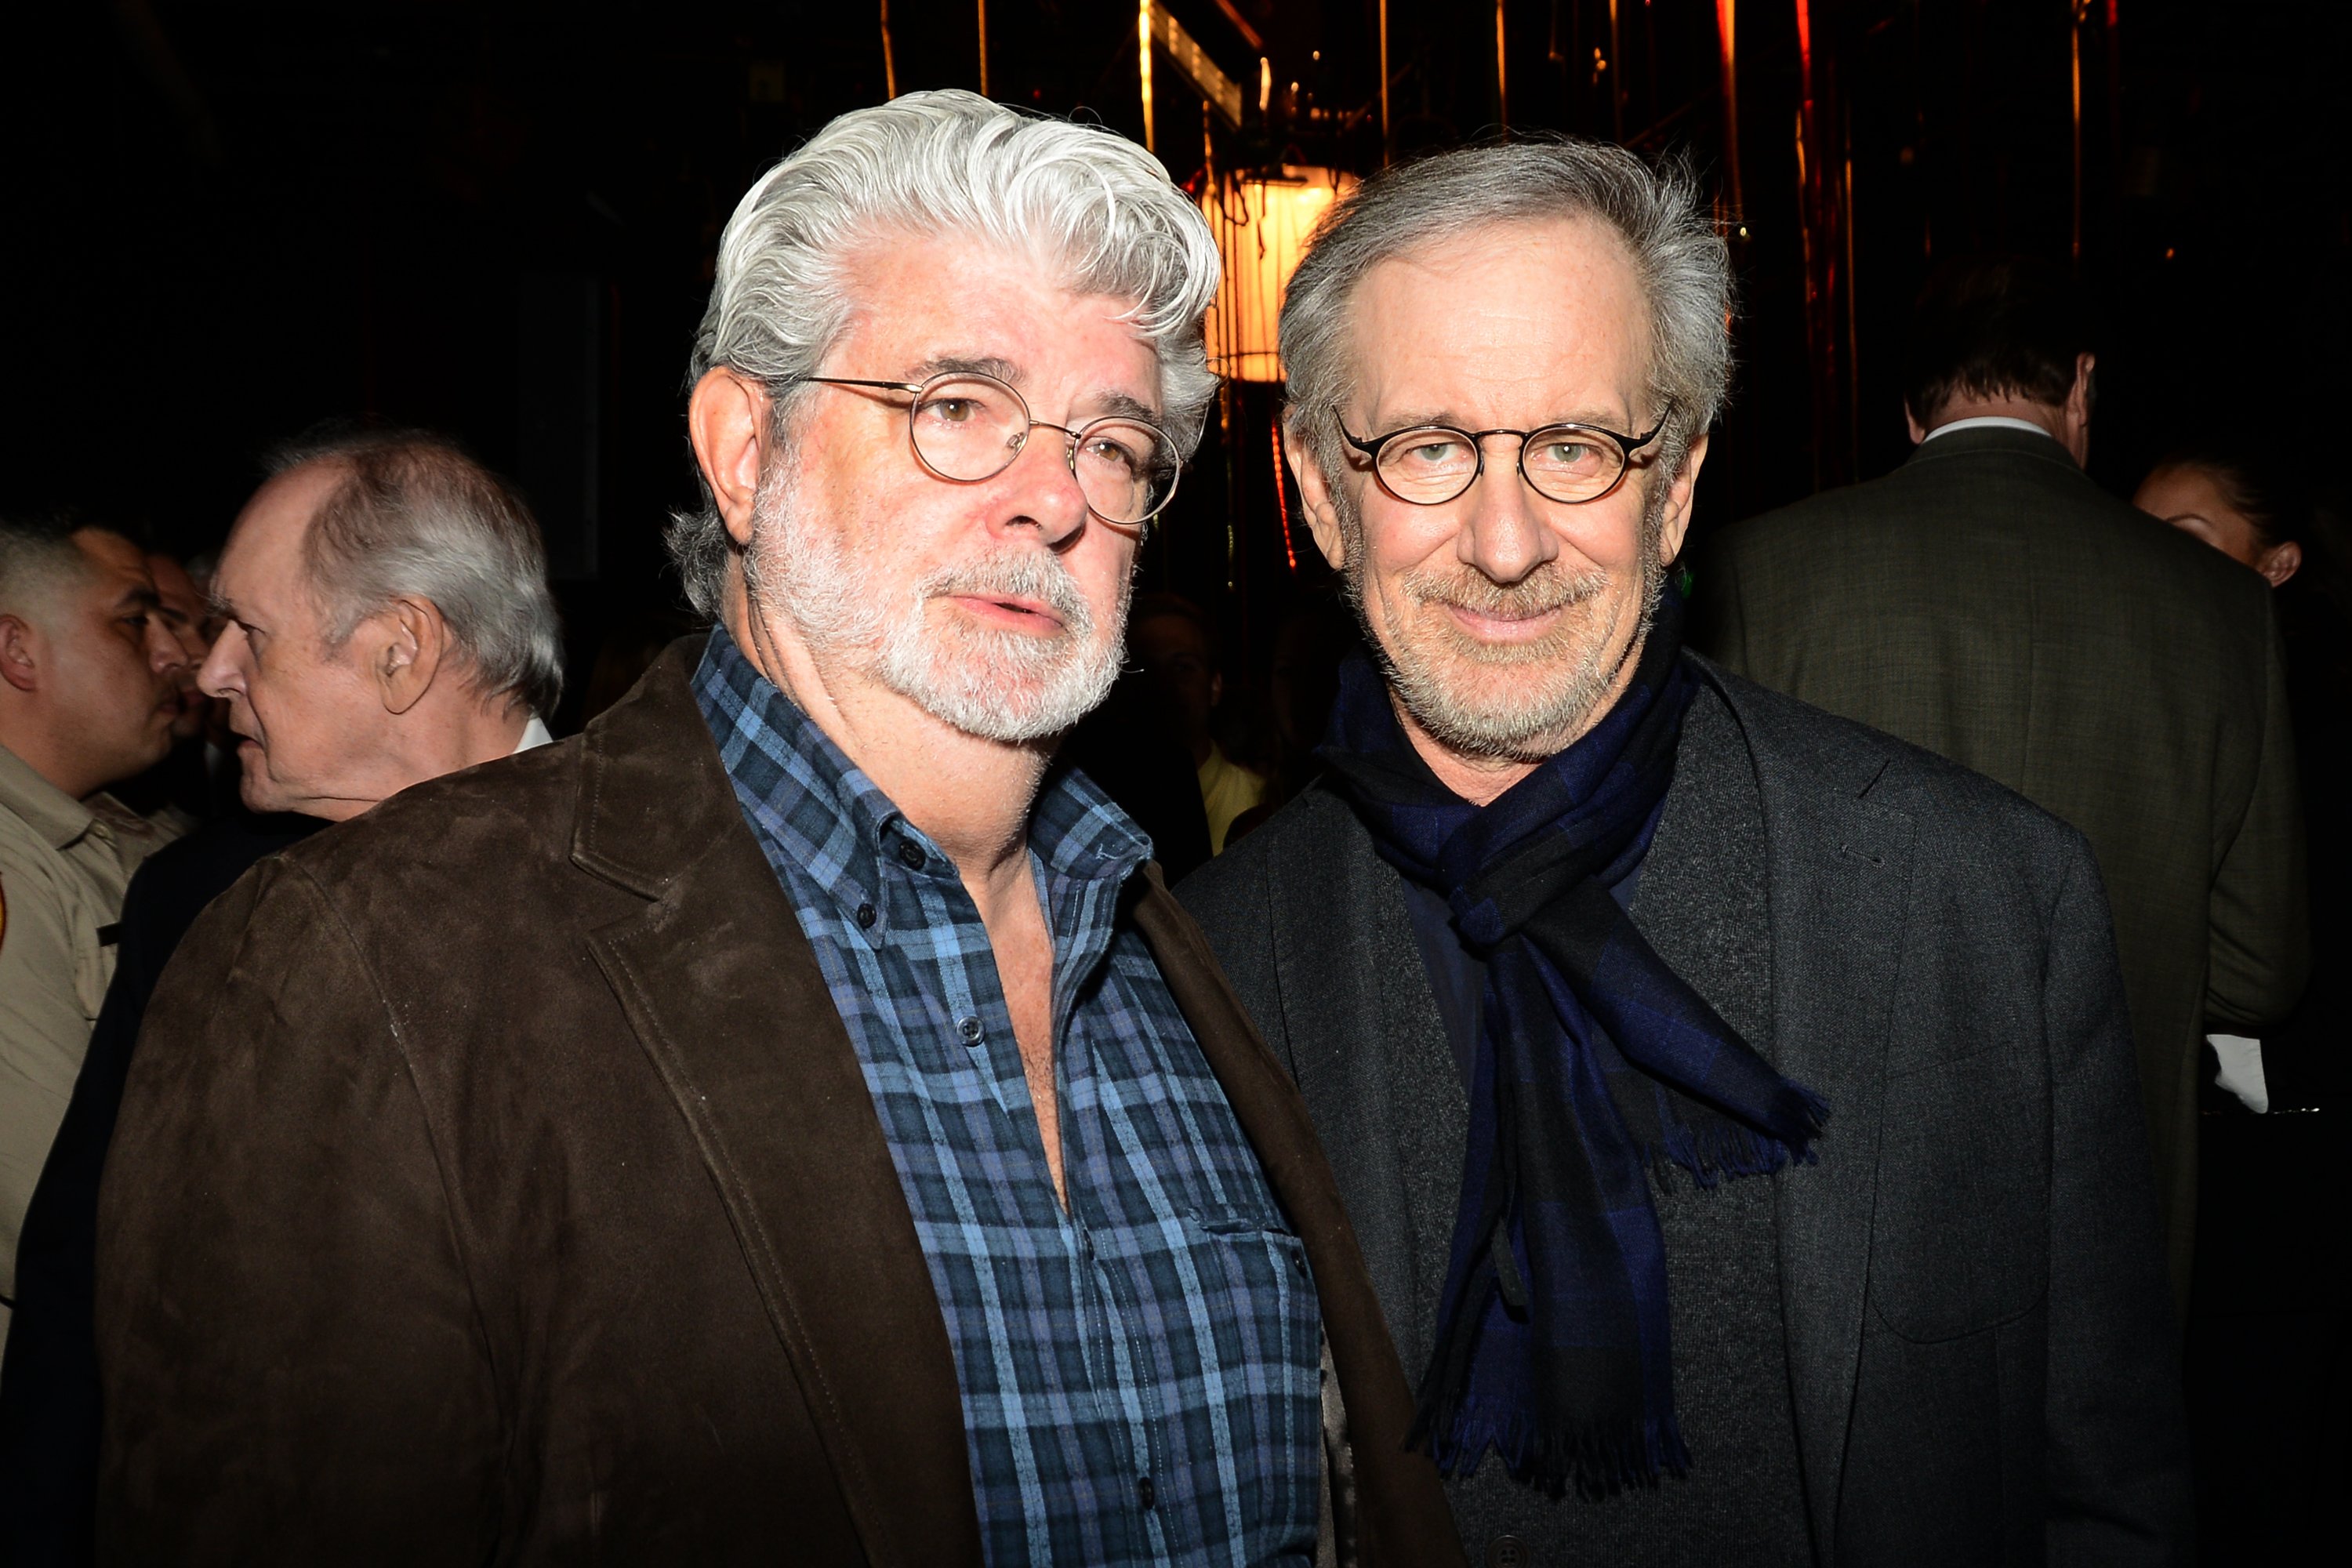 George Lucas of Star Wars fame and Steven Spielberg of Jaws fame in front of other eople